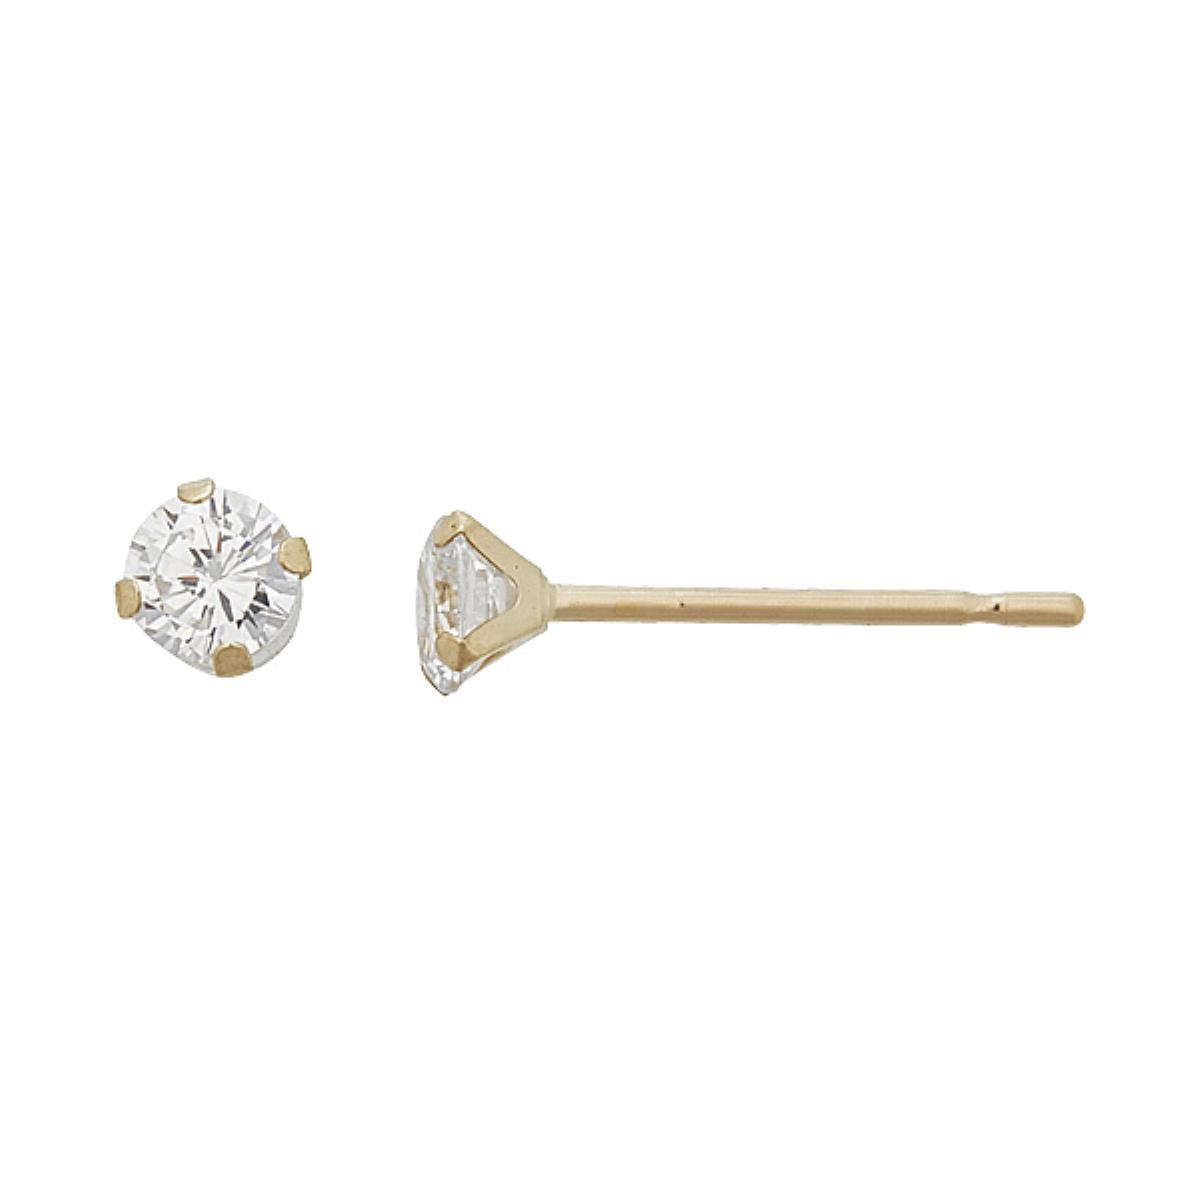 10K Yellow Gold 3mm Martini Round Cut Solitaire Stud Earring